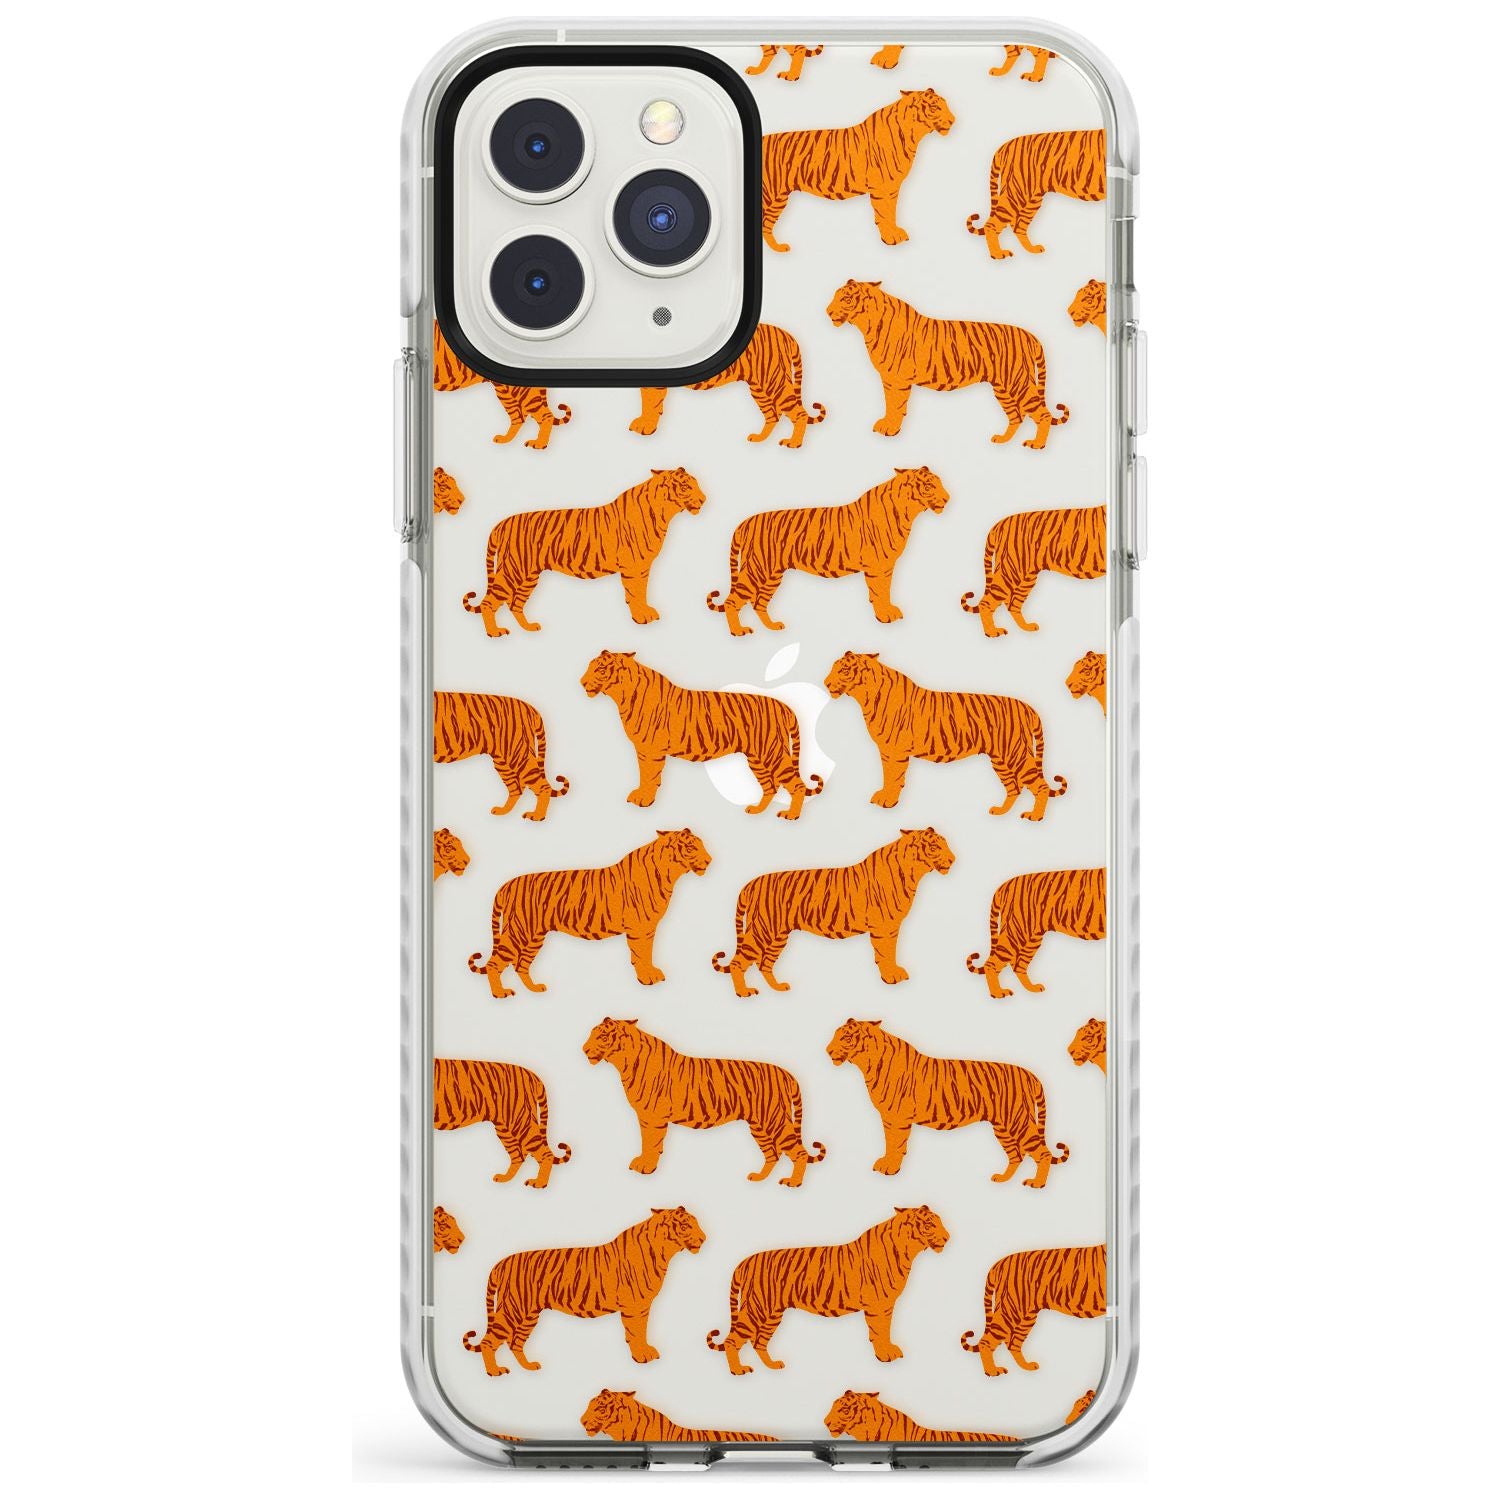 Tigers on Clear Pattern Impact Phone Case for iPhone 11 Pro Max